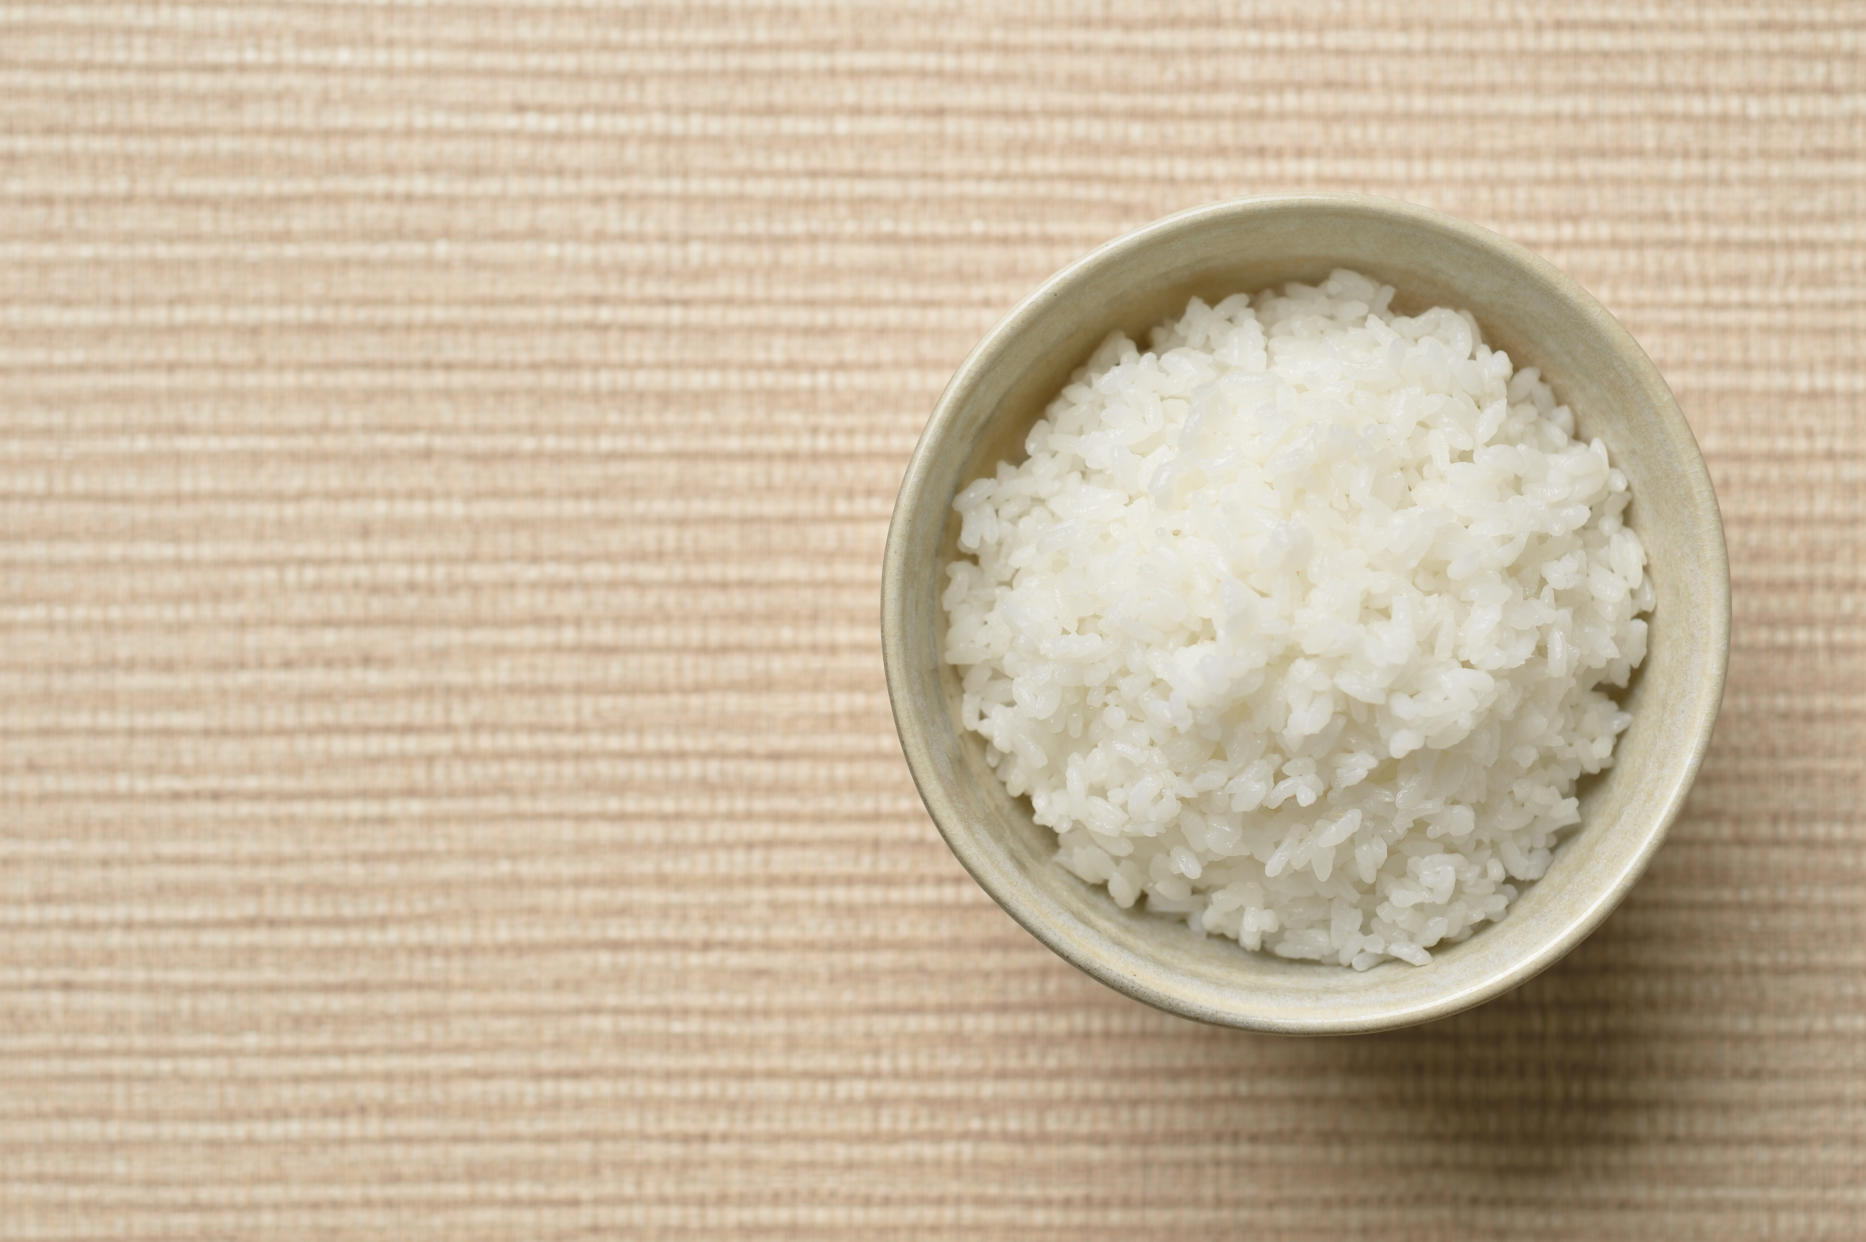 A bowl of rice is seen on a brown mat. Cooked rice unrefrigerated can cause food poisoning. 